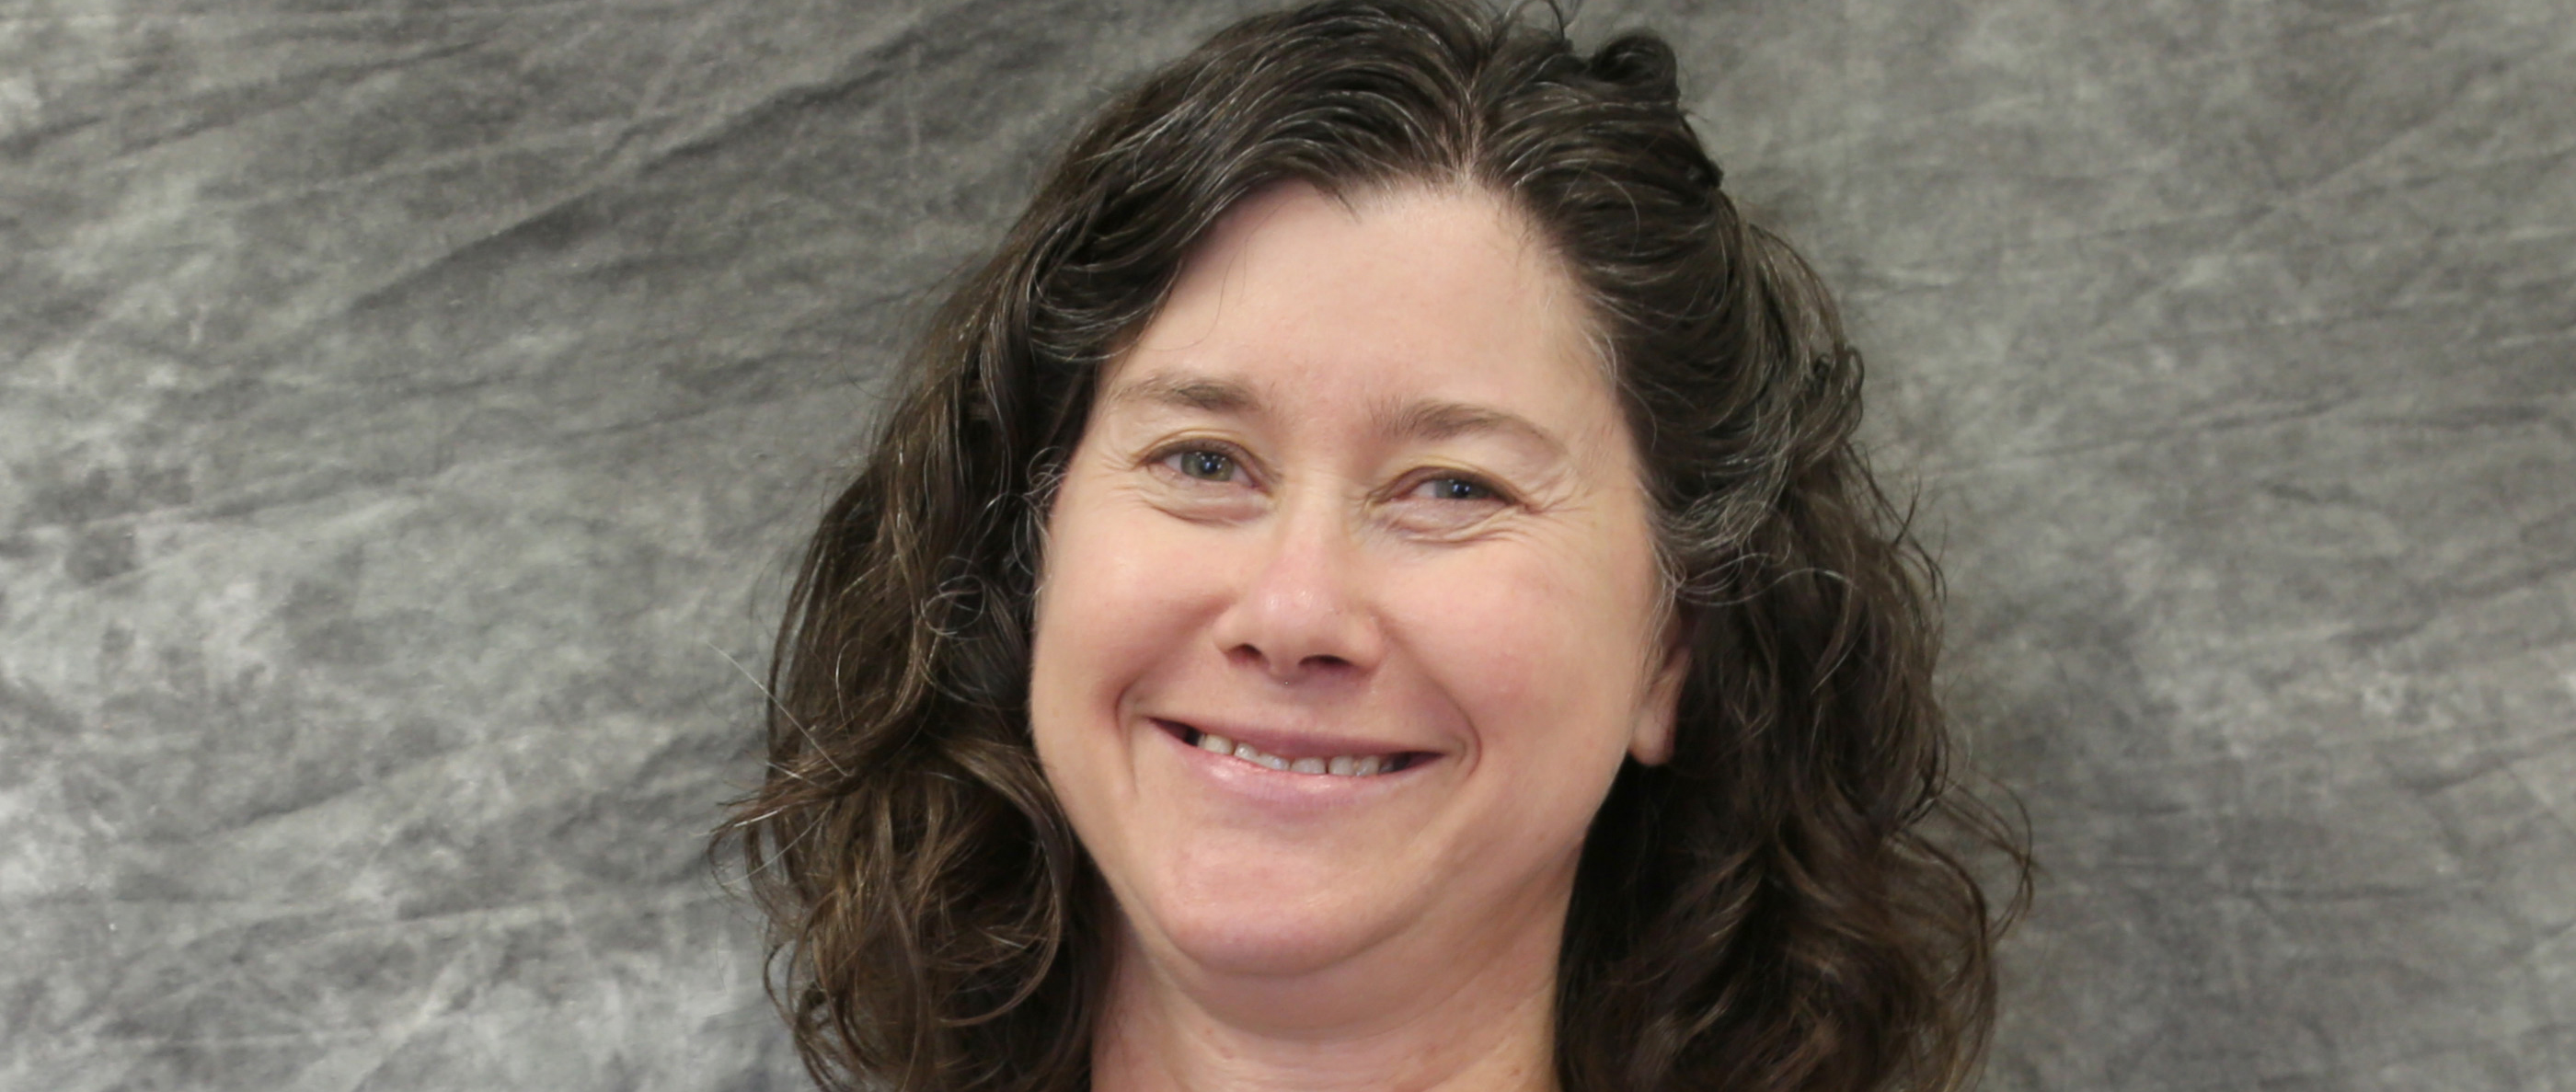 As of June 2018, Janine Sherrier is the new department head for crop and soil sciences.